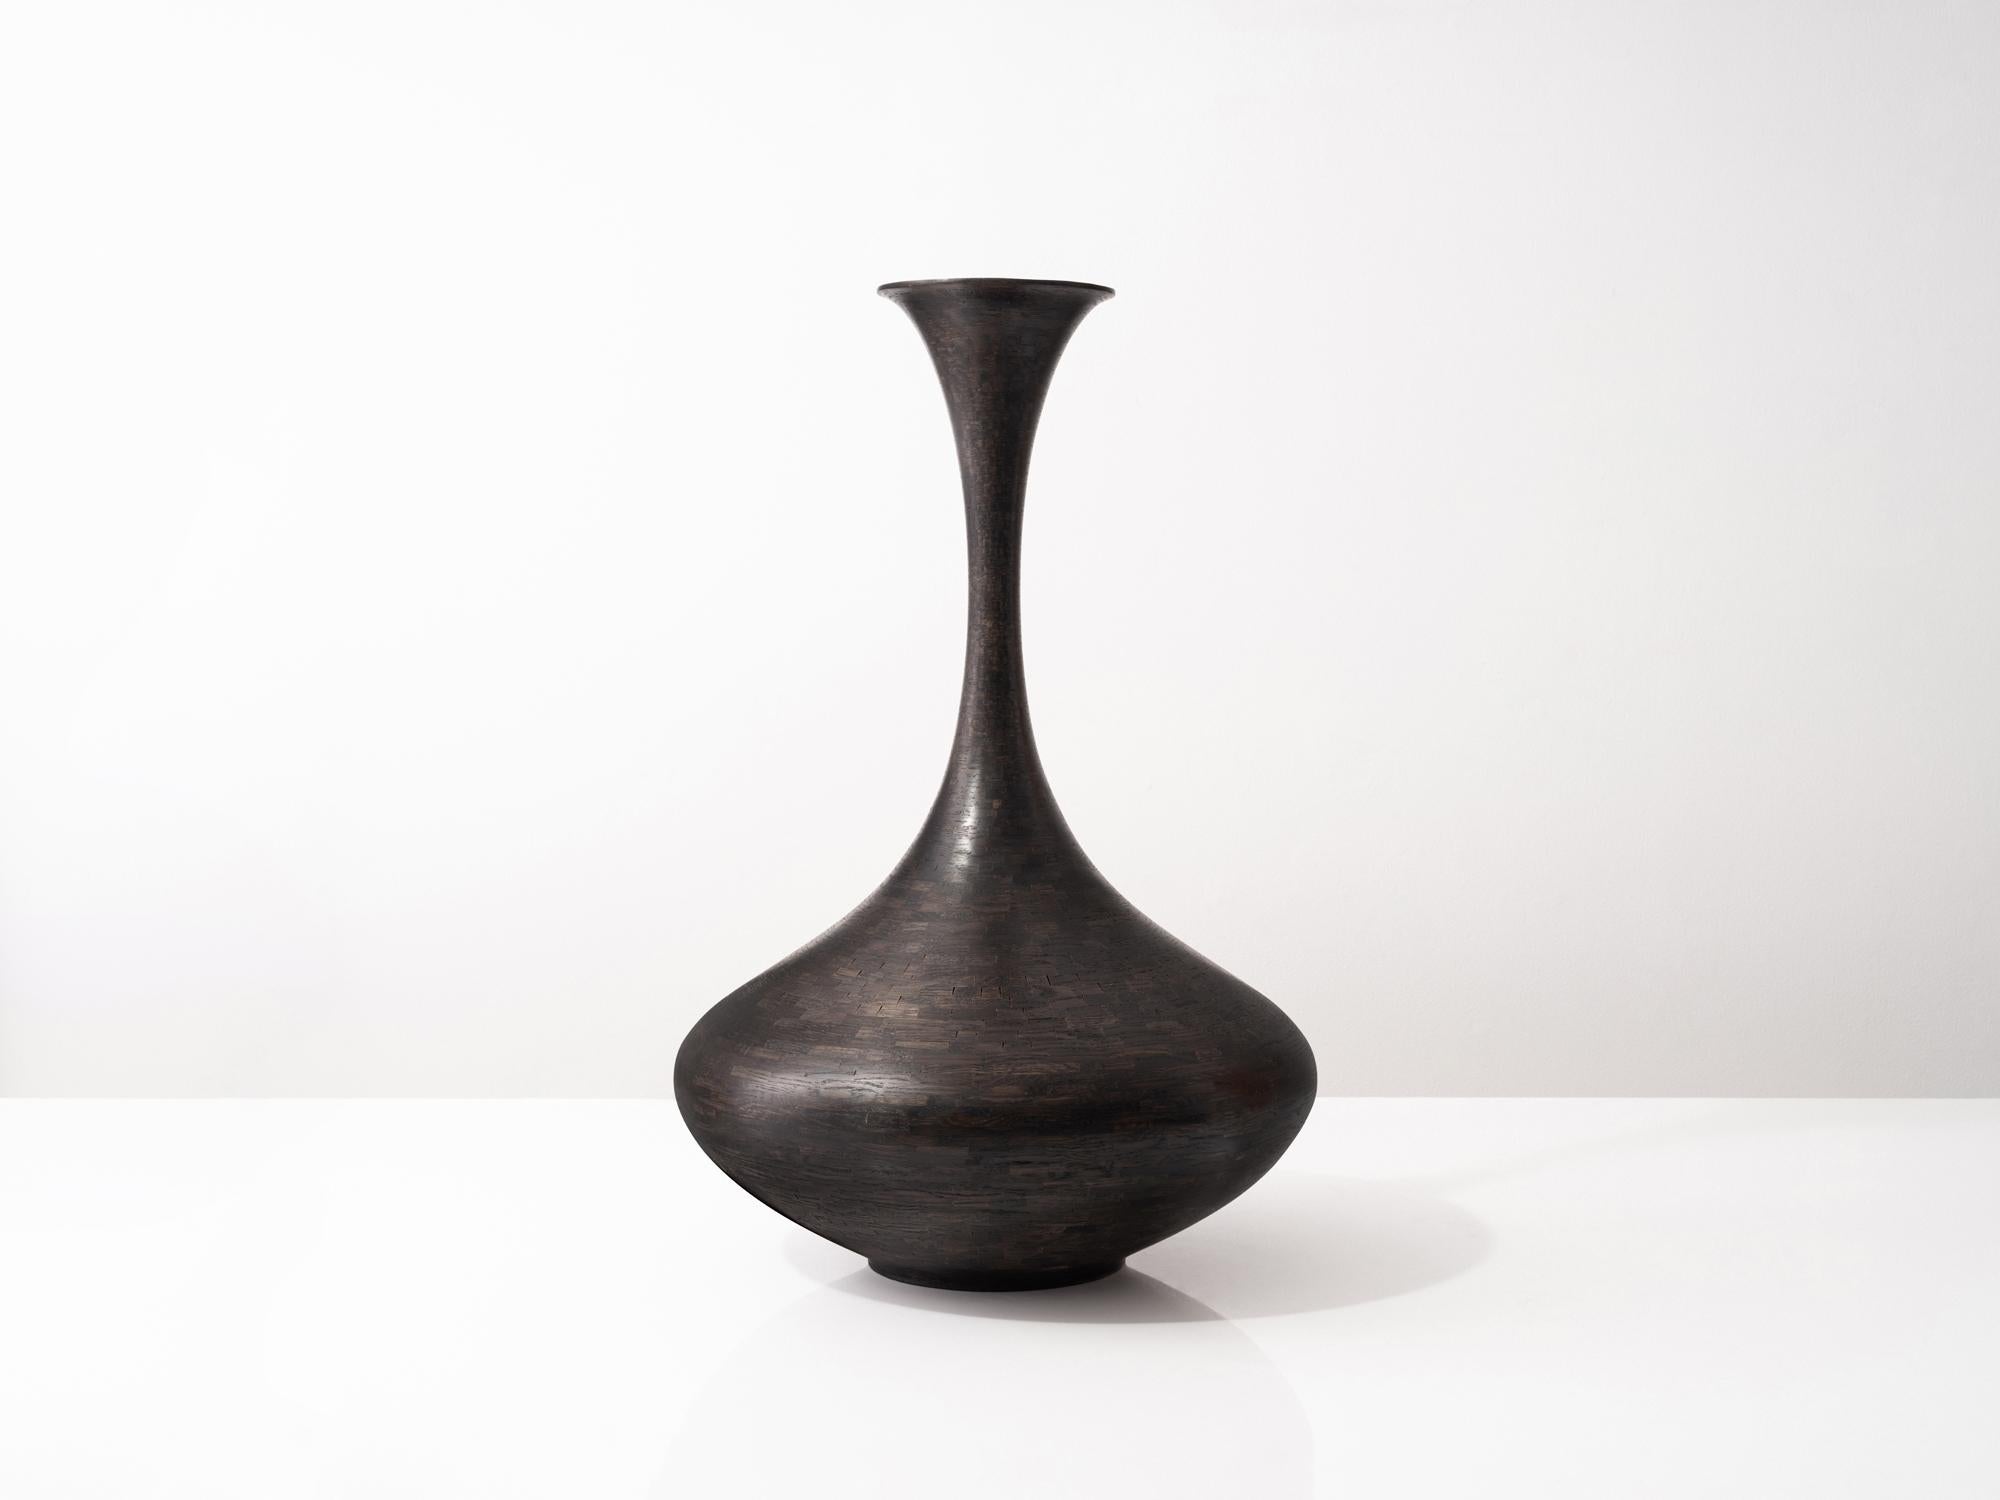 Part of Richard Haining's STACKED Collection, this wooden vessel with its elongated neck is made from reclaimed oak. The salvaged wood offcuts were sourced from a variety of local Brooklyn wood shops, as well as from deconstructed turn of the